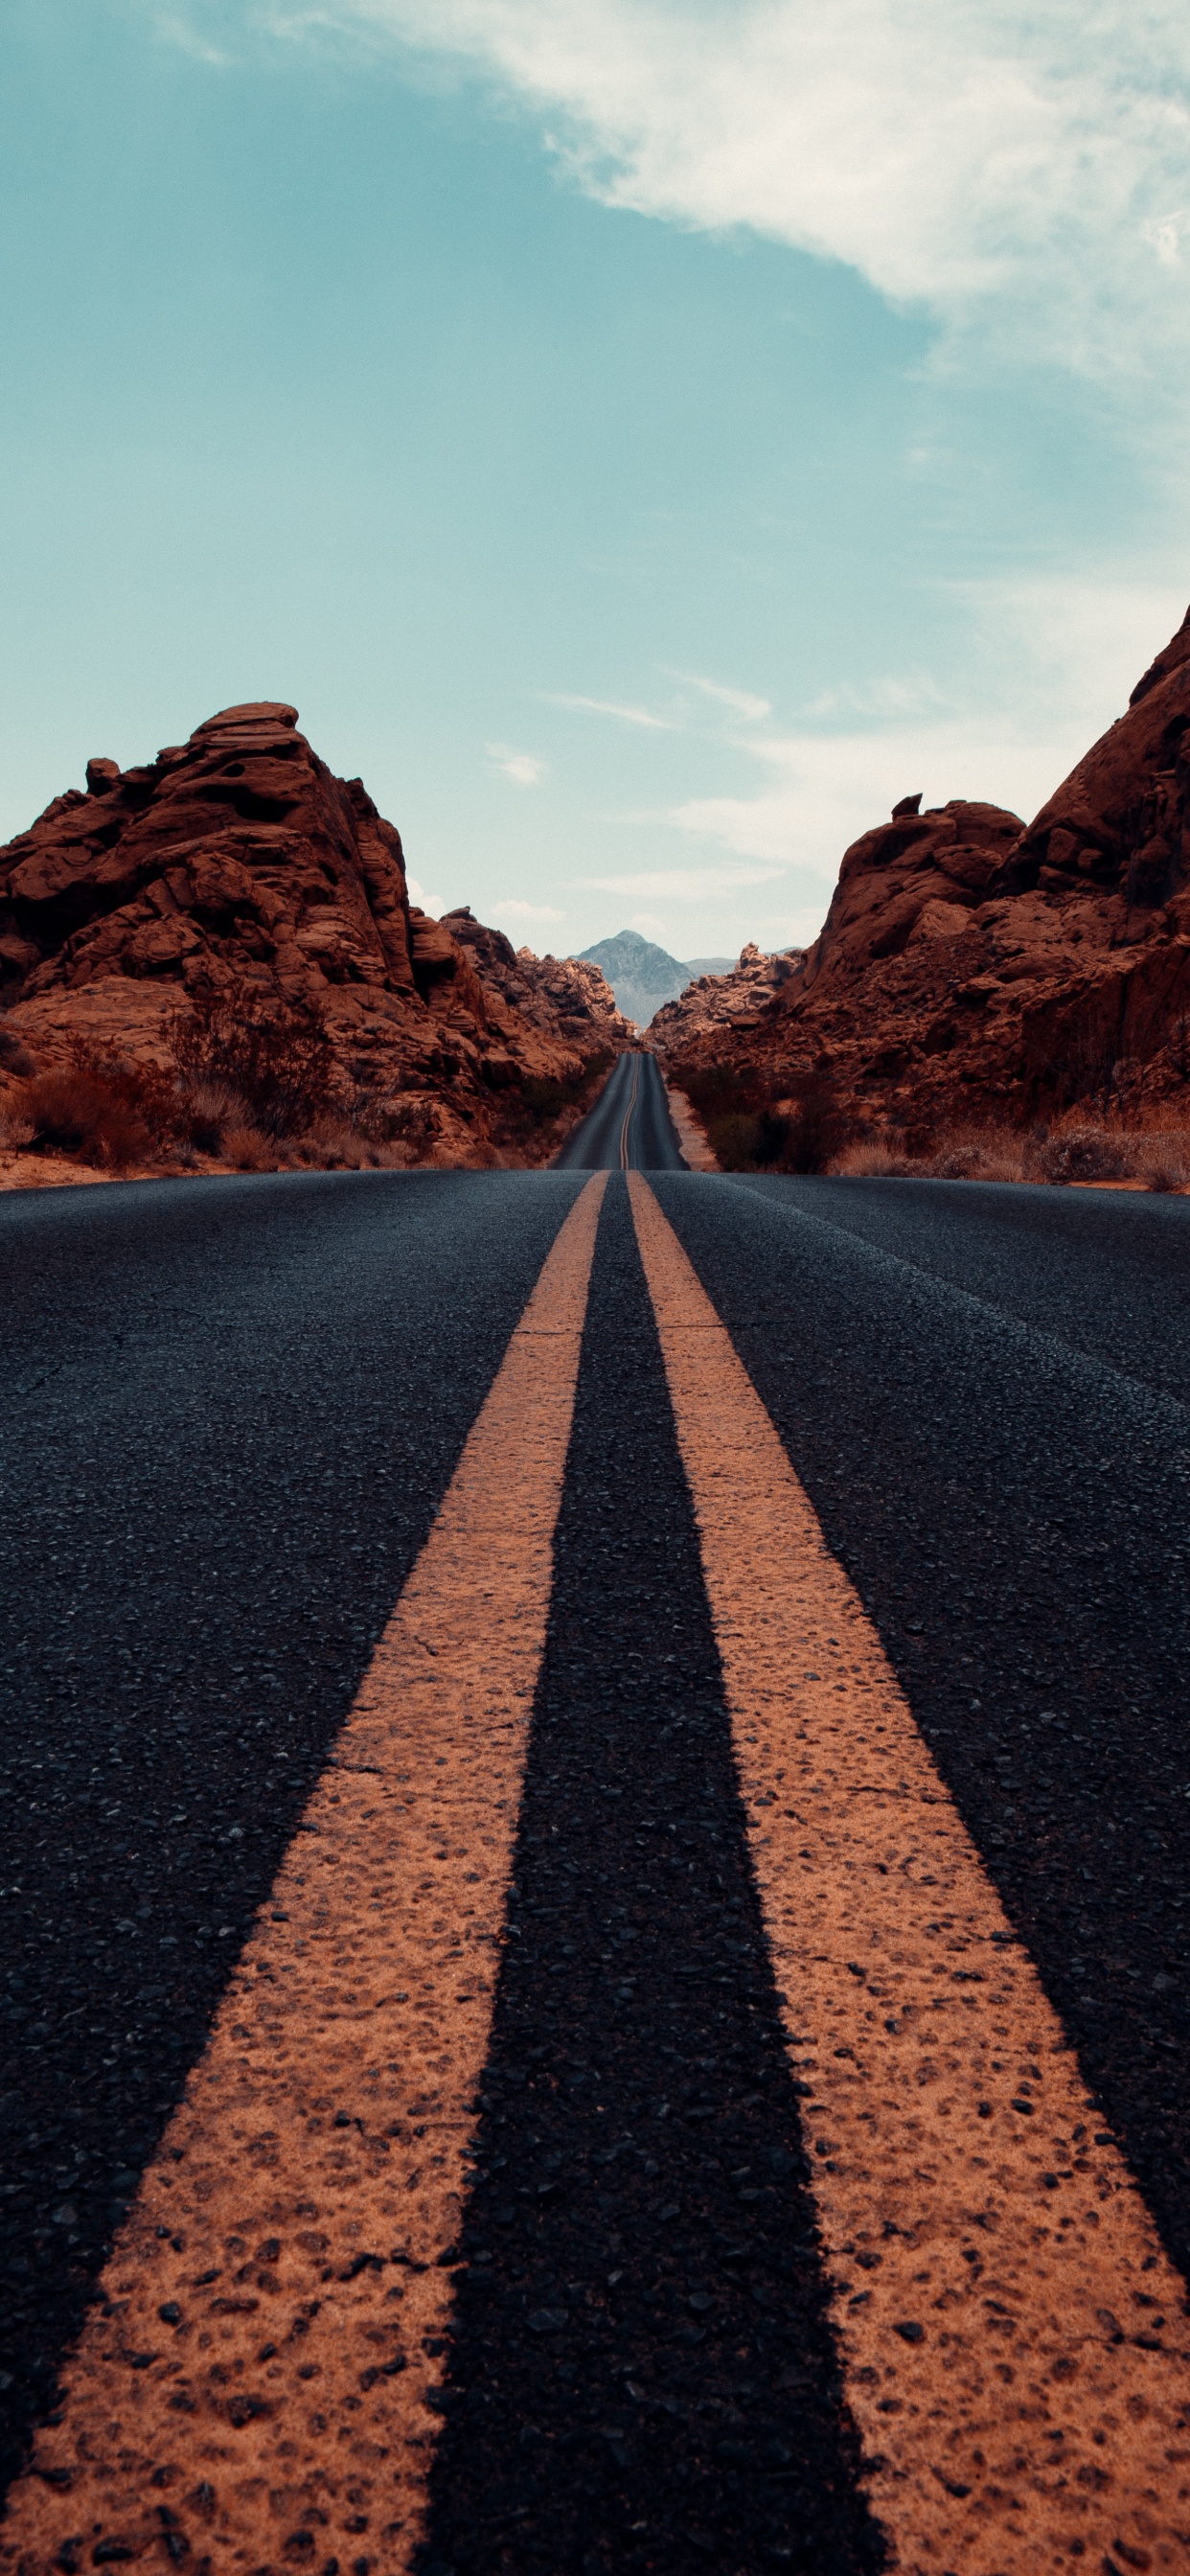 An empty road surrounded by red rocks and a blue sky. - Road